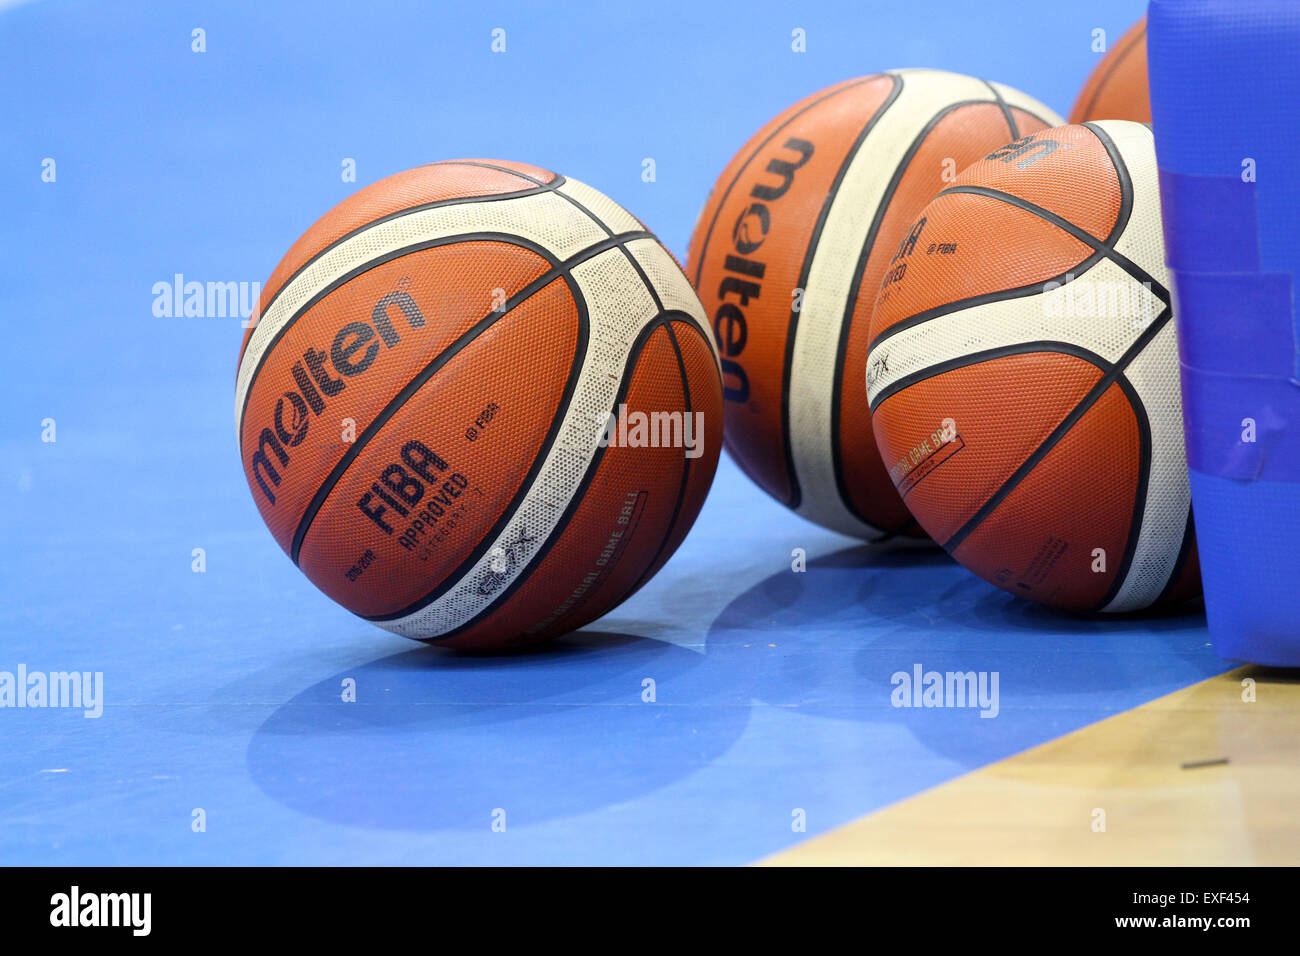 Lignano, Italy.13th July, 2015. Basket ball during the second round  basketball match between Lithuania and Czech Republic of the U20 European  Championship Men 2015 in Pala Getur sports hall of Lignano on